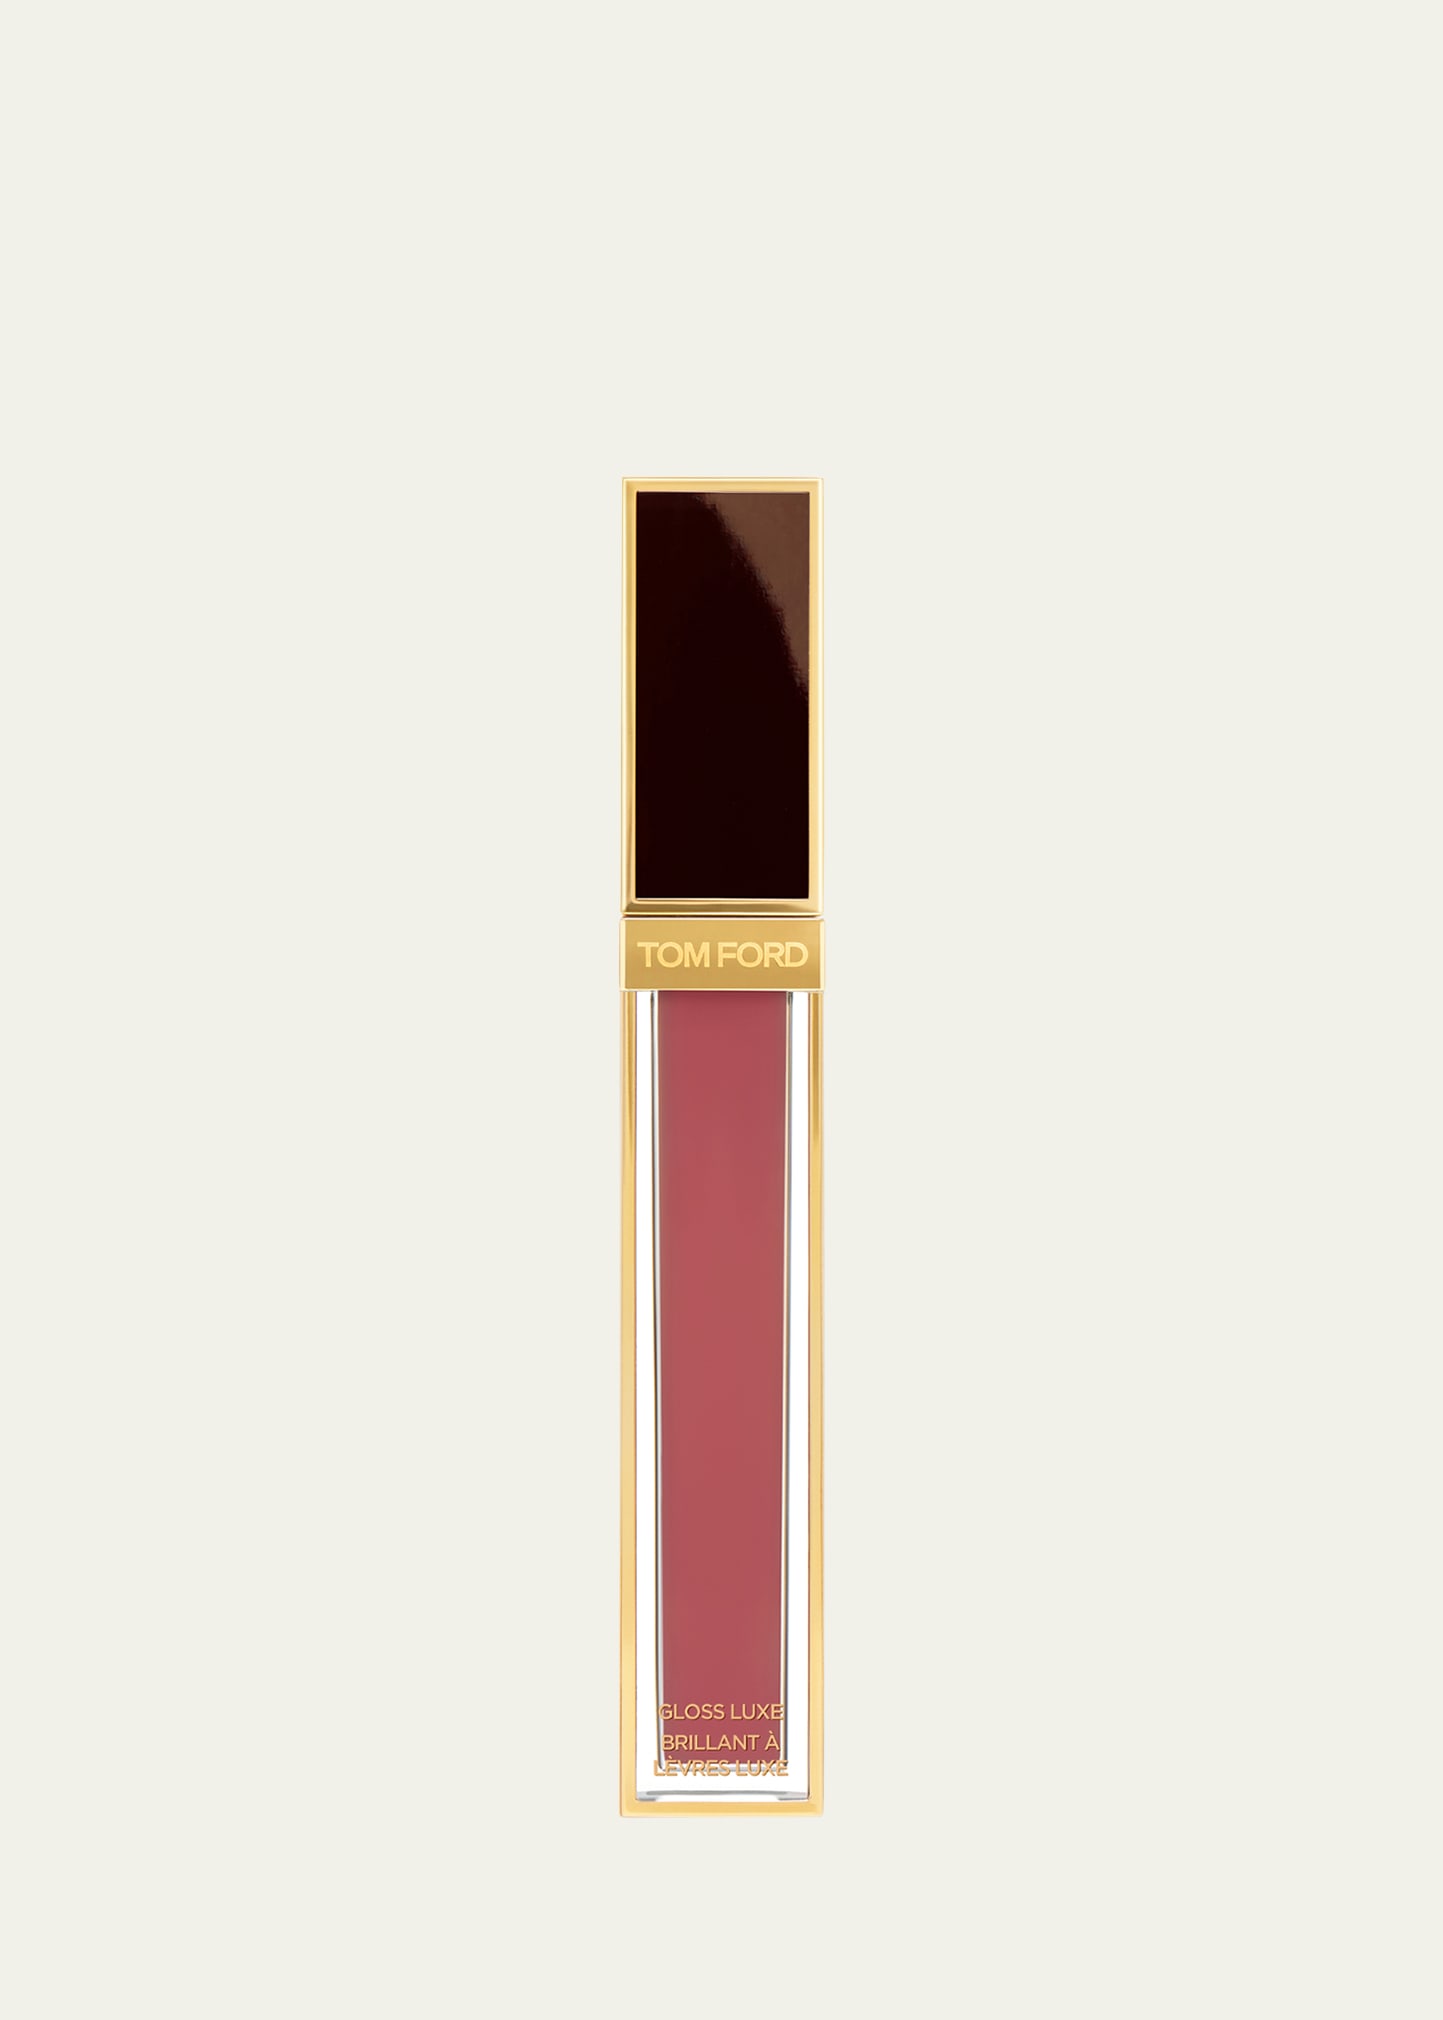 Tom Ford Gloss Luxe In 2422 Sunrise Pink